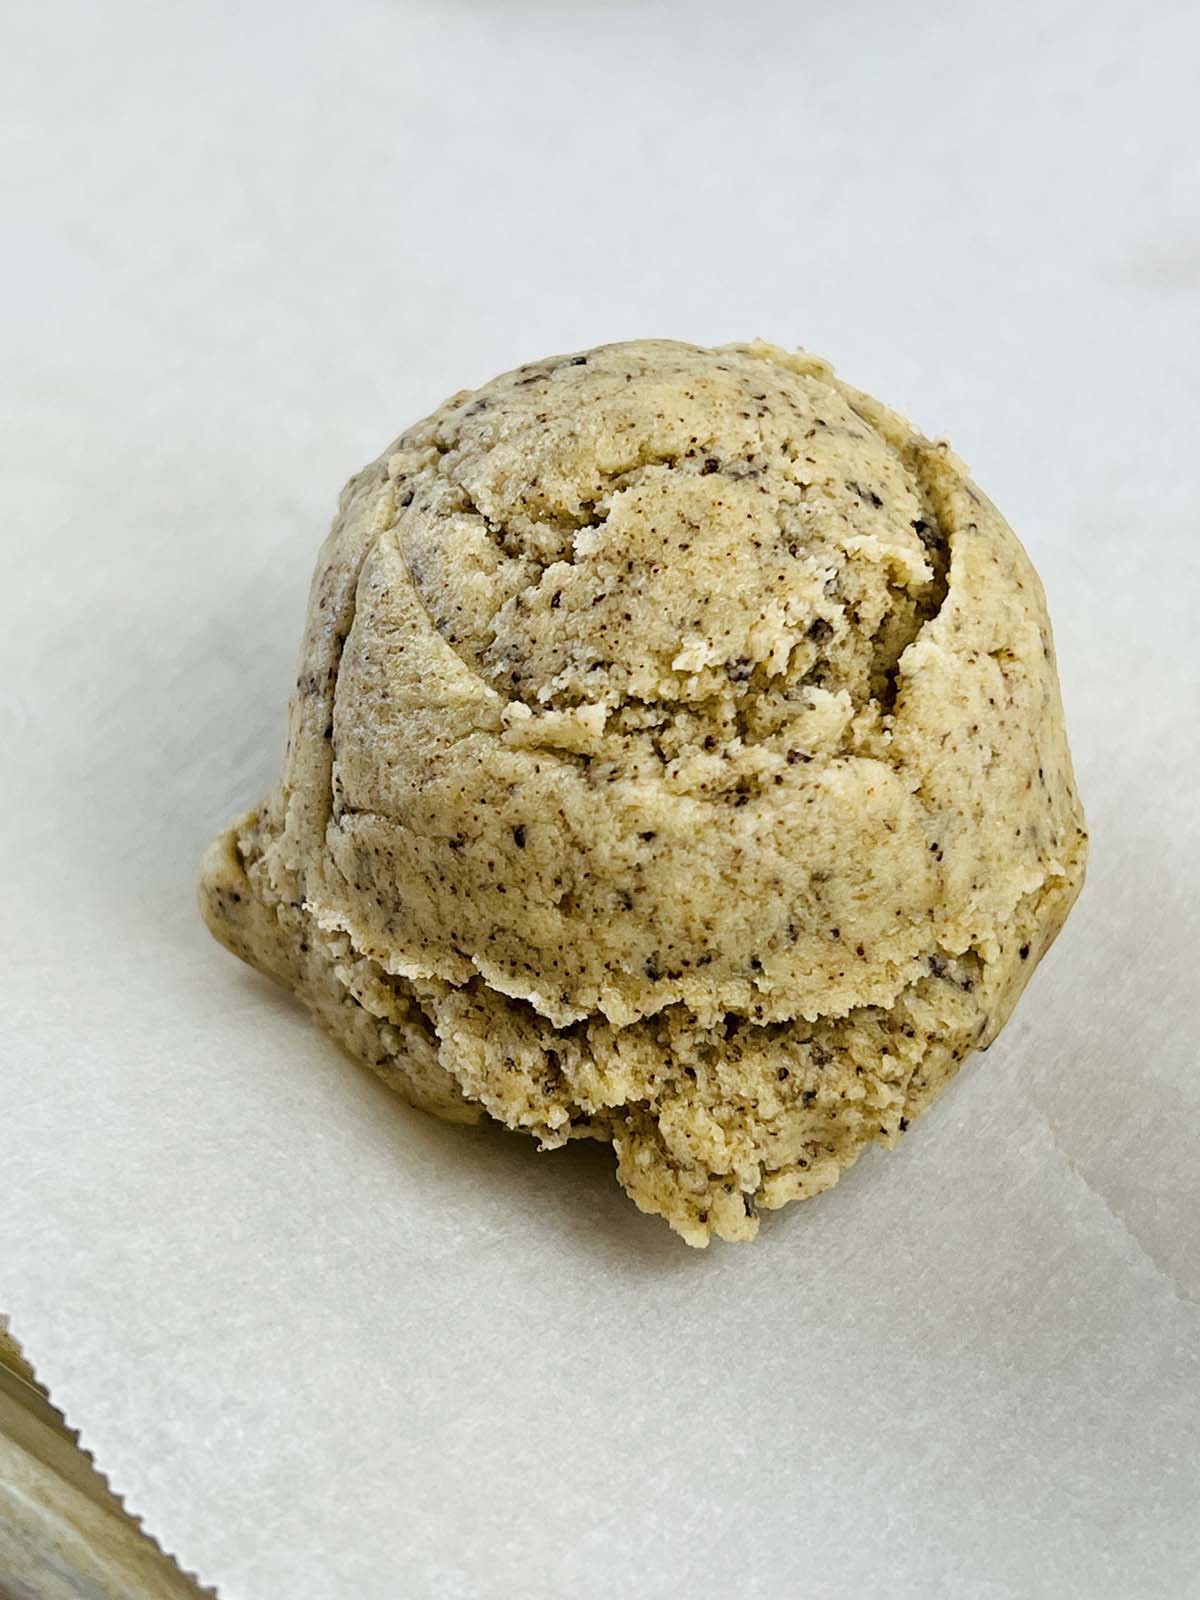 A scoop of cookie dough on parchment paper.